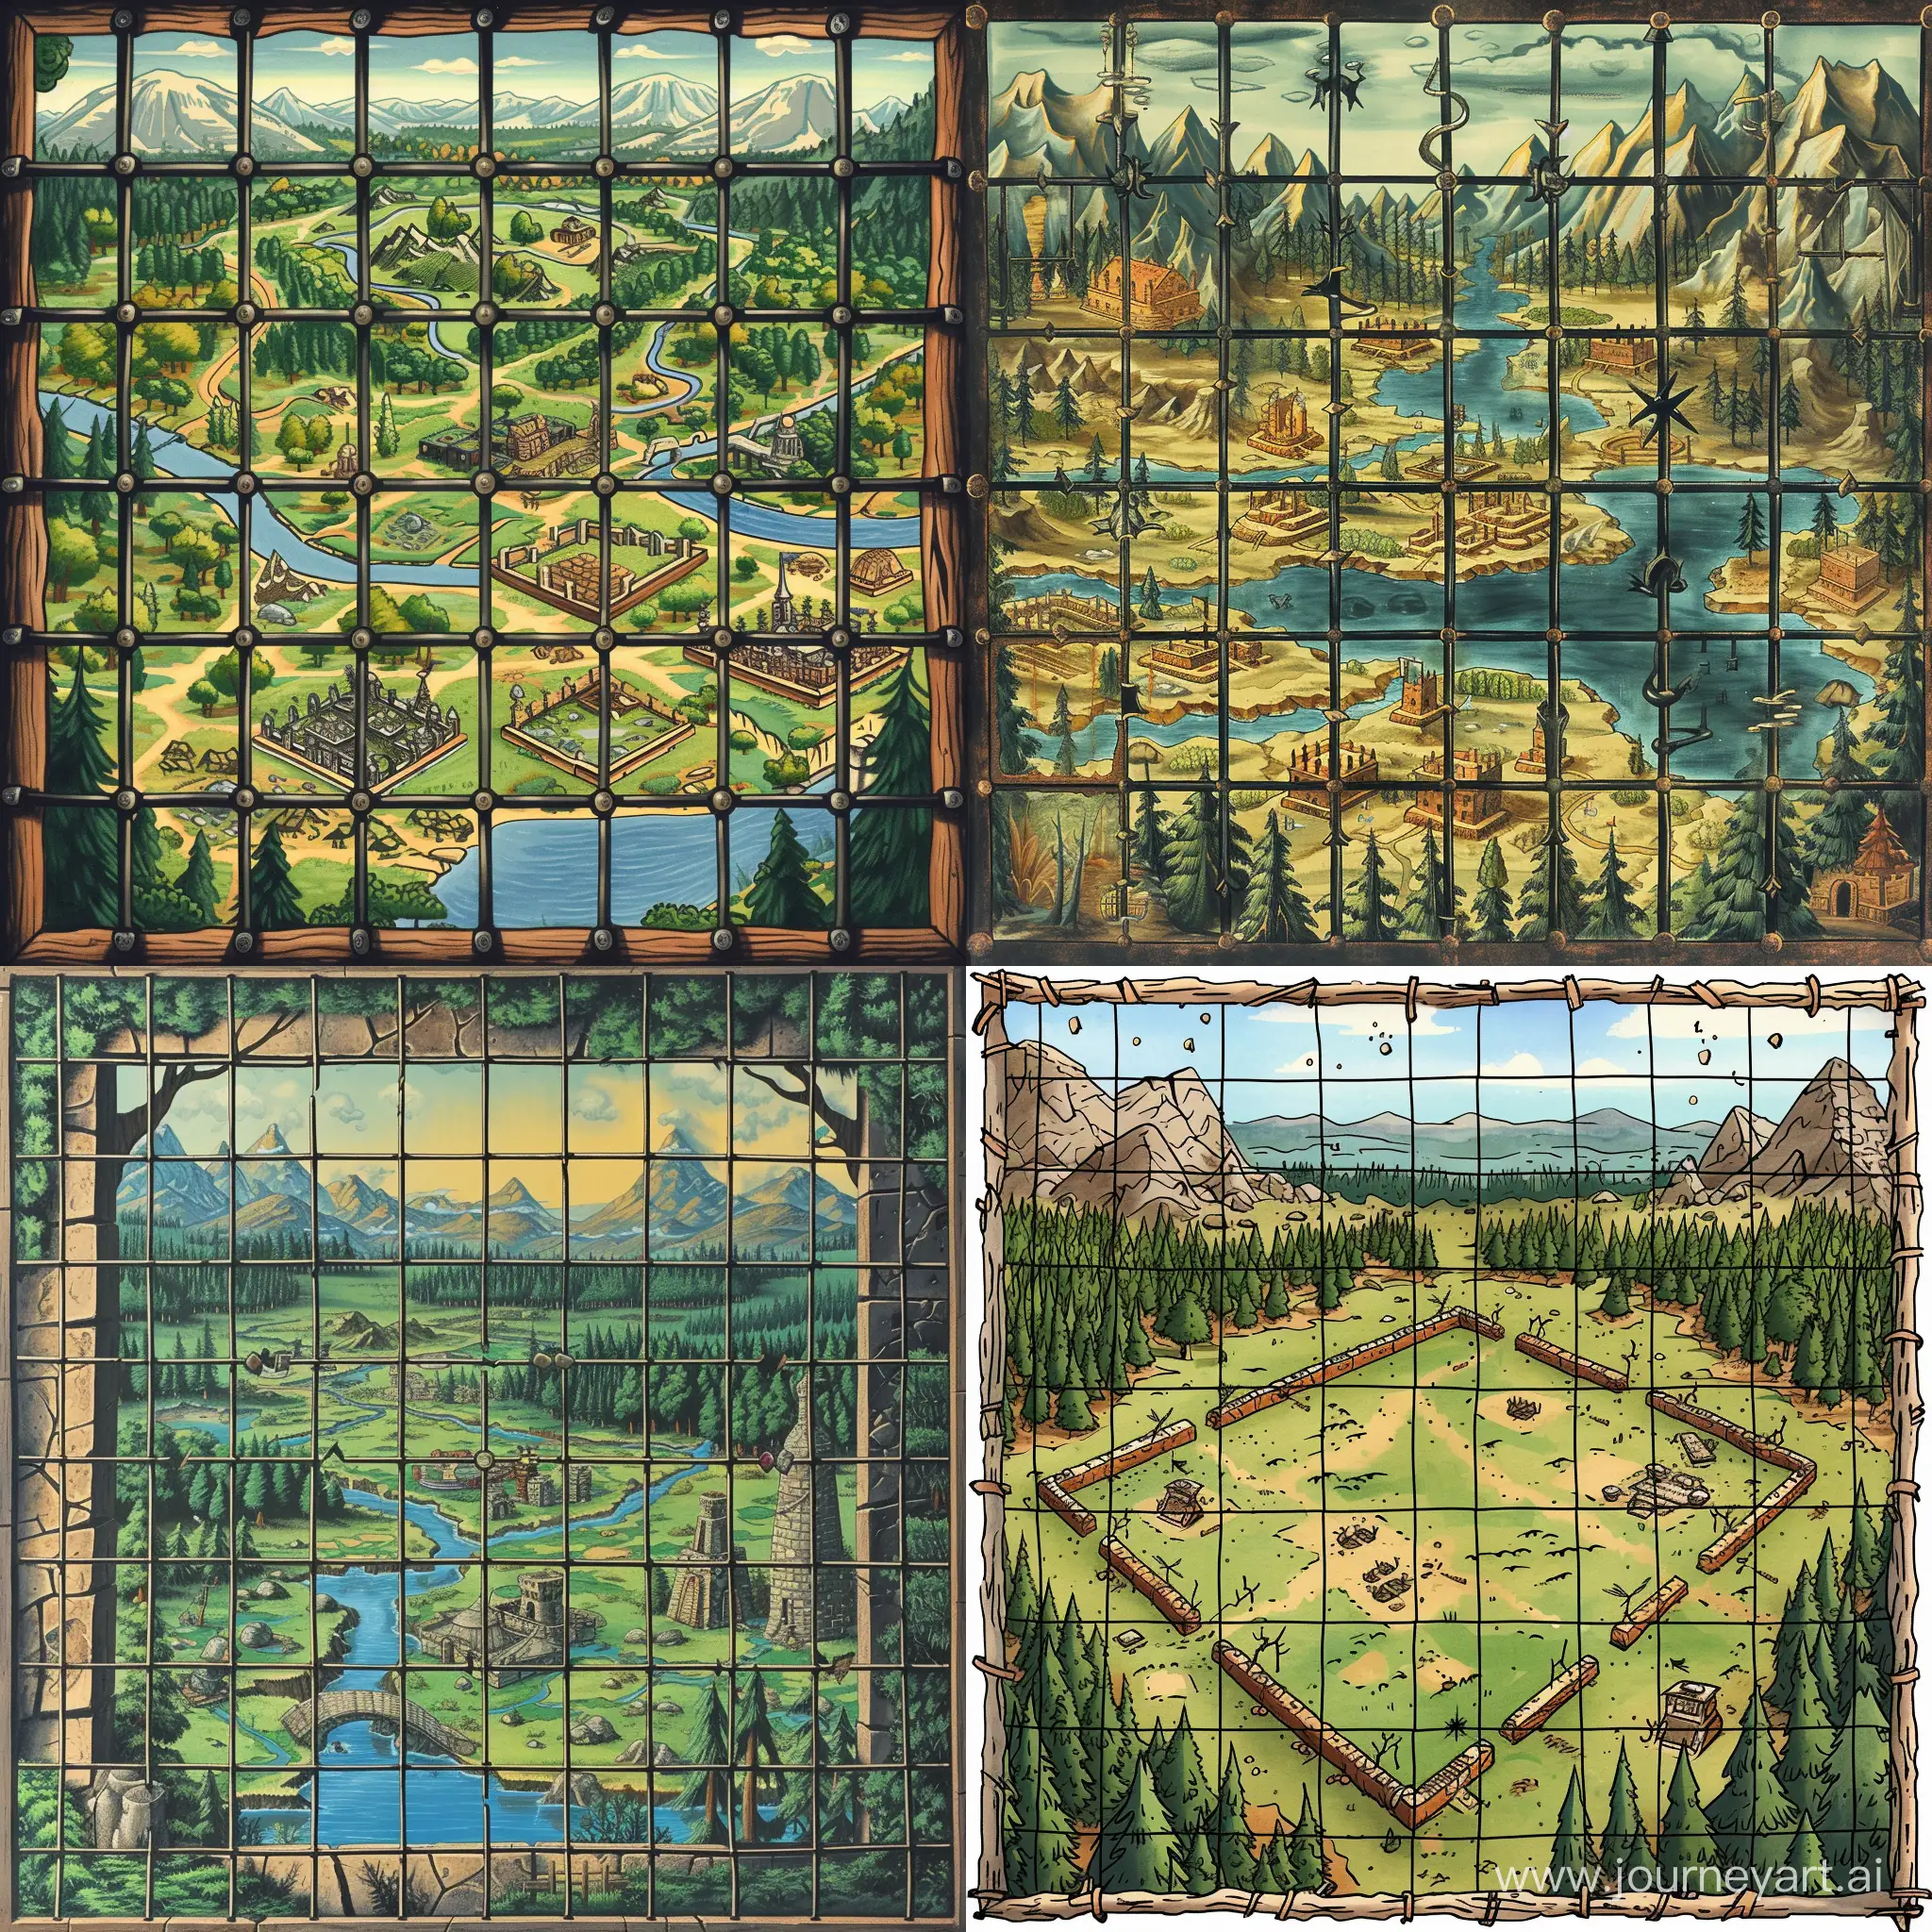 Epic-War-Strategy-Board-HandPainted-32x32-Field-with-Forests-Mountains-and-Reservoirs